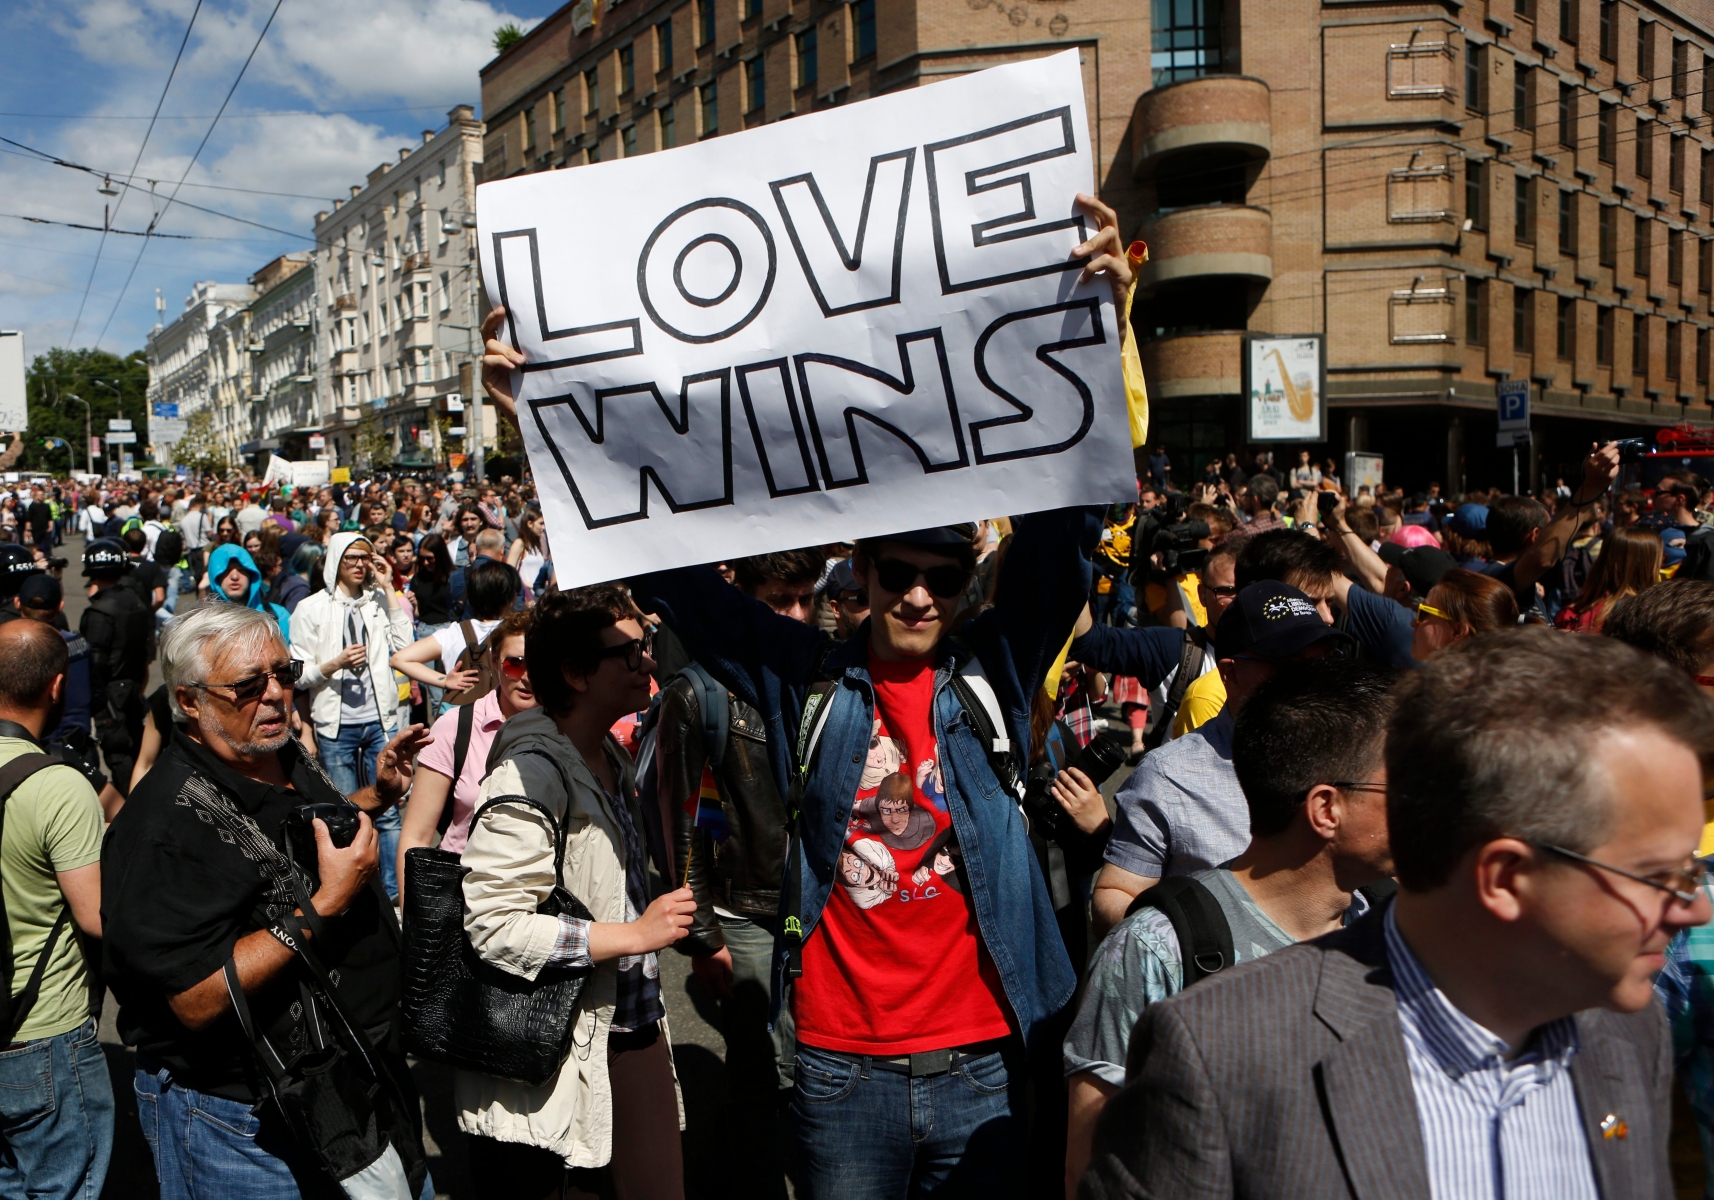 Ukrainian gay rights activists gather for an event in Kiev, Ukraine, Sunday, June 12, 2016.  Authorities sanctioned gay rights marches after the new pro-Western government came into office, and police forces were guarding the procession in central Kiev, Sunday, to protect against far-right groups.(AP Photo/Sergei Chuzavkov) Ukraine Gay Rights